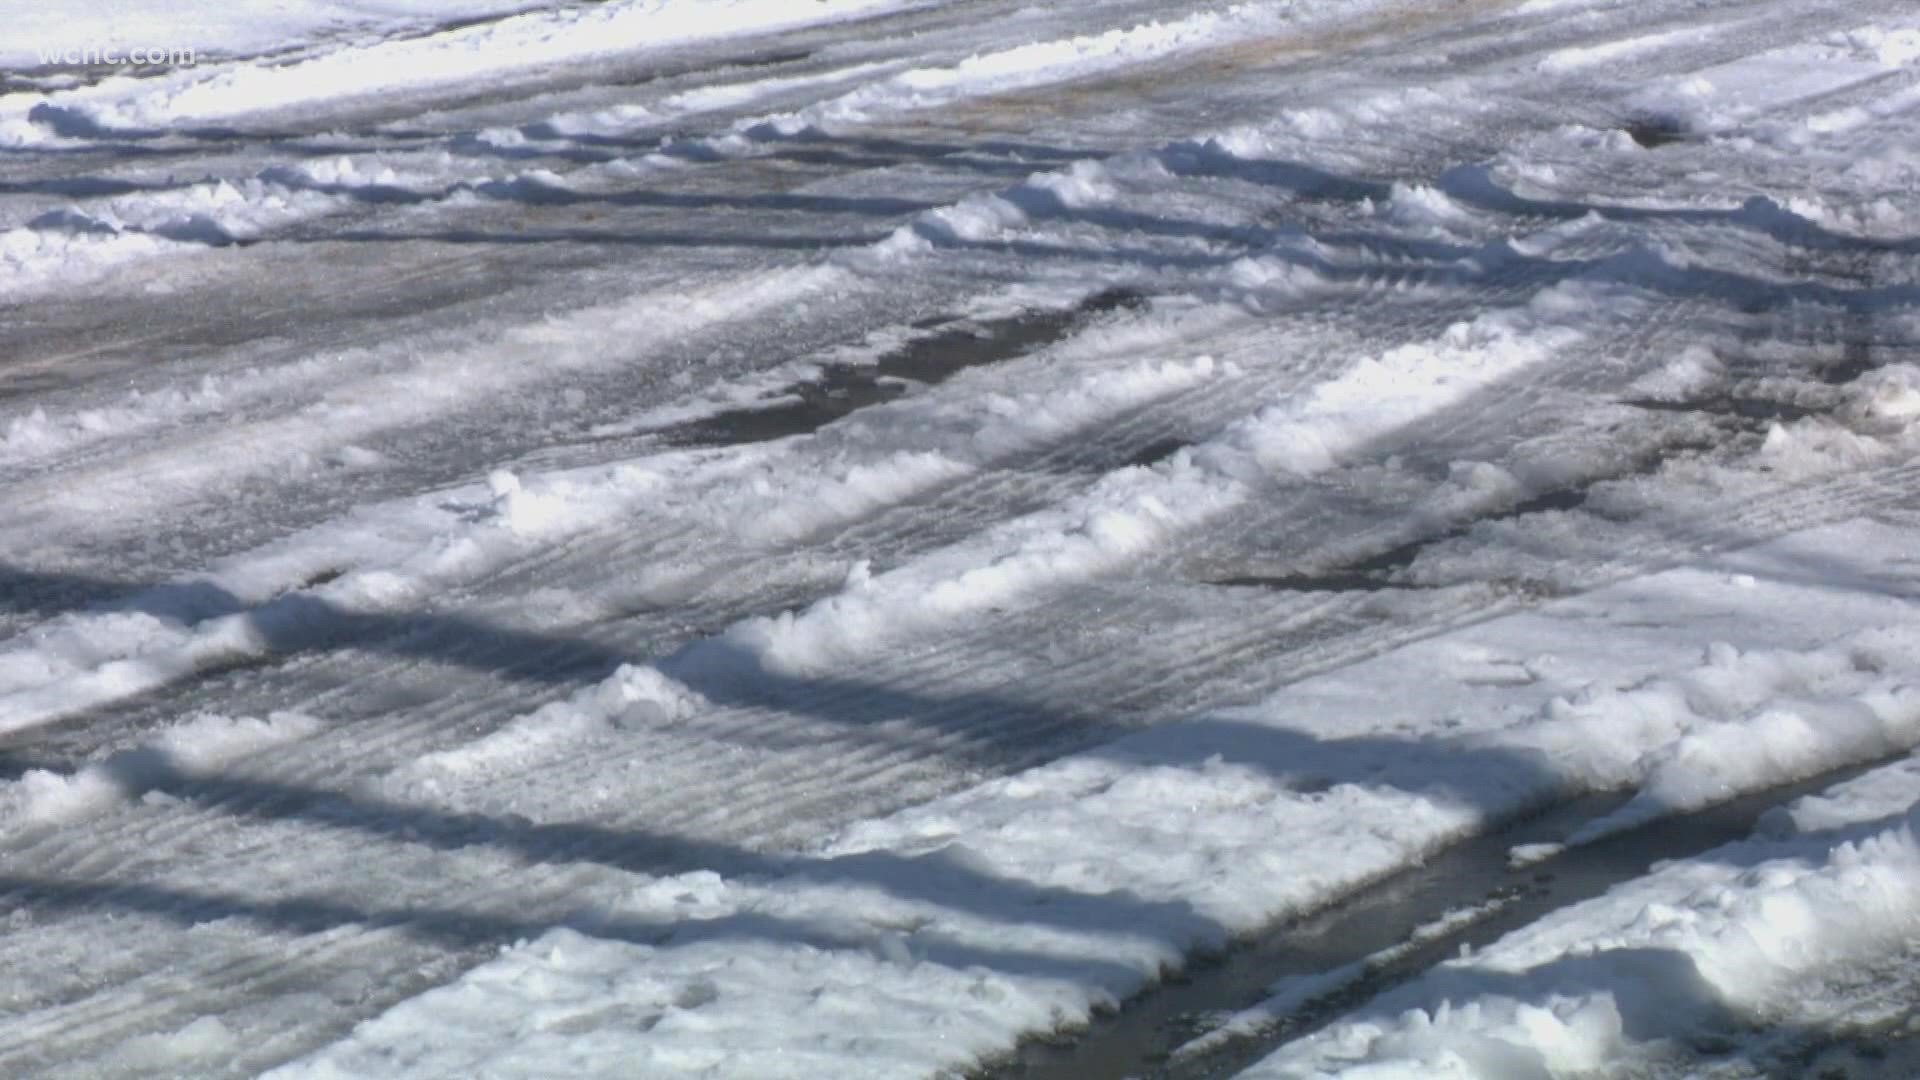 NCDOT crews have been working around the clock to clear the roads.